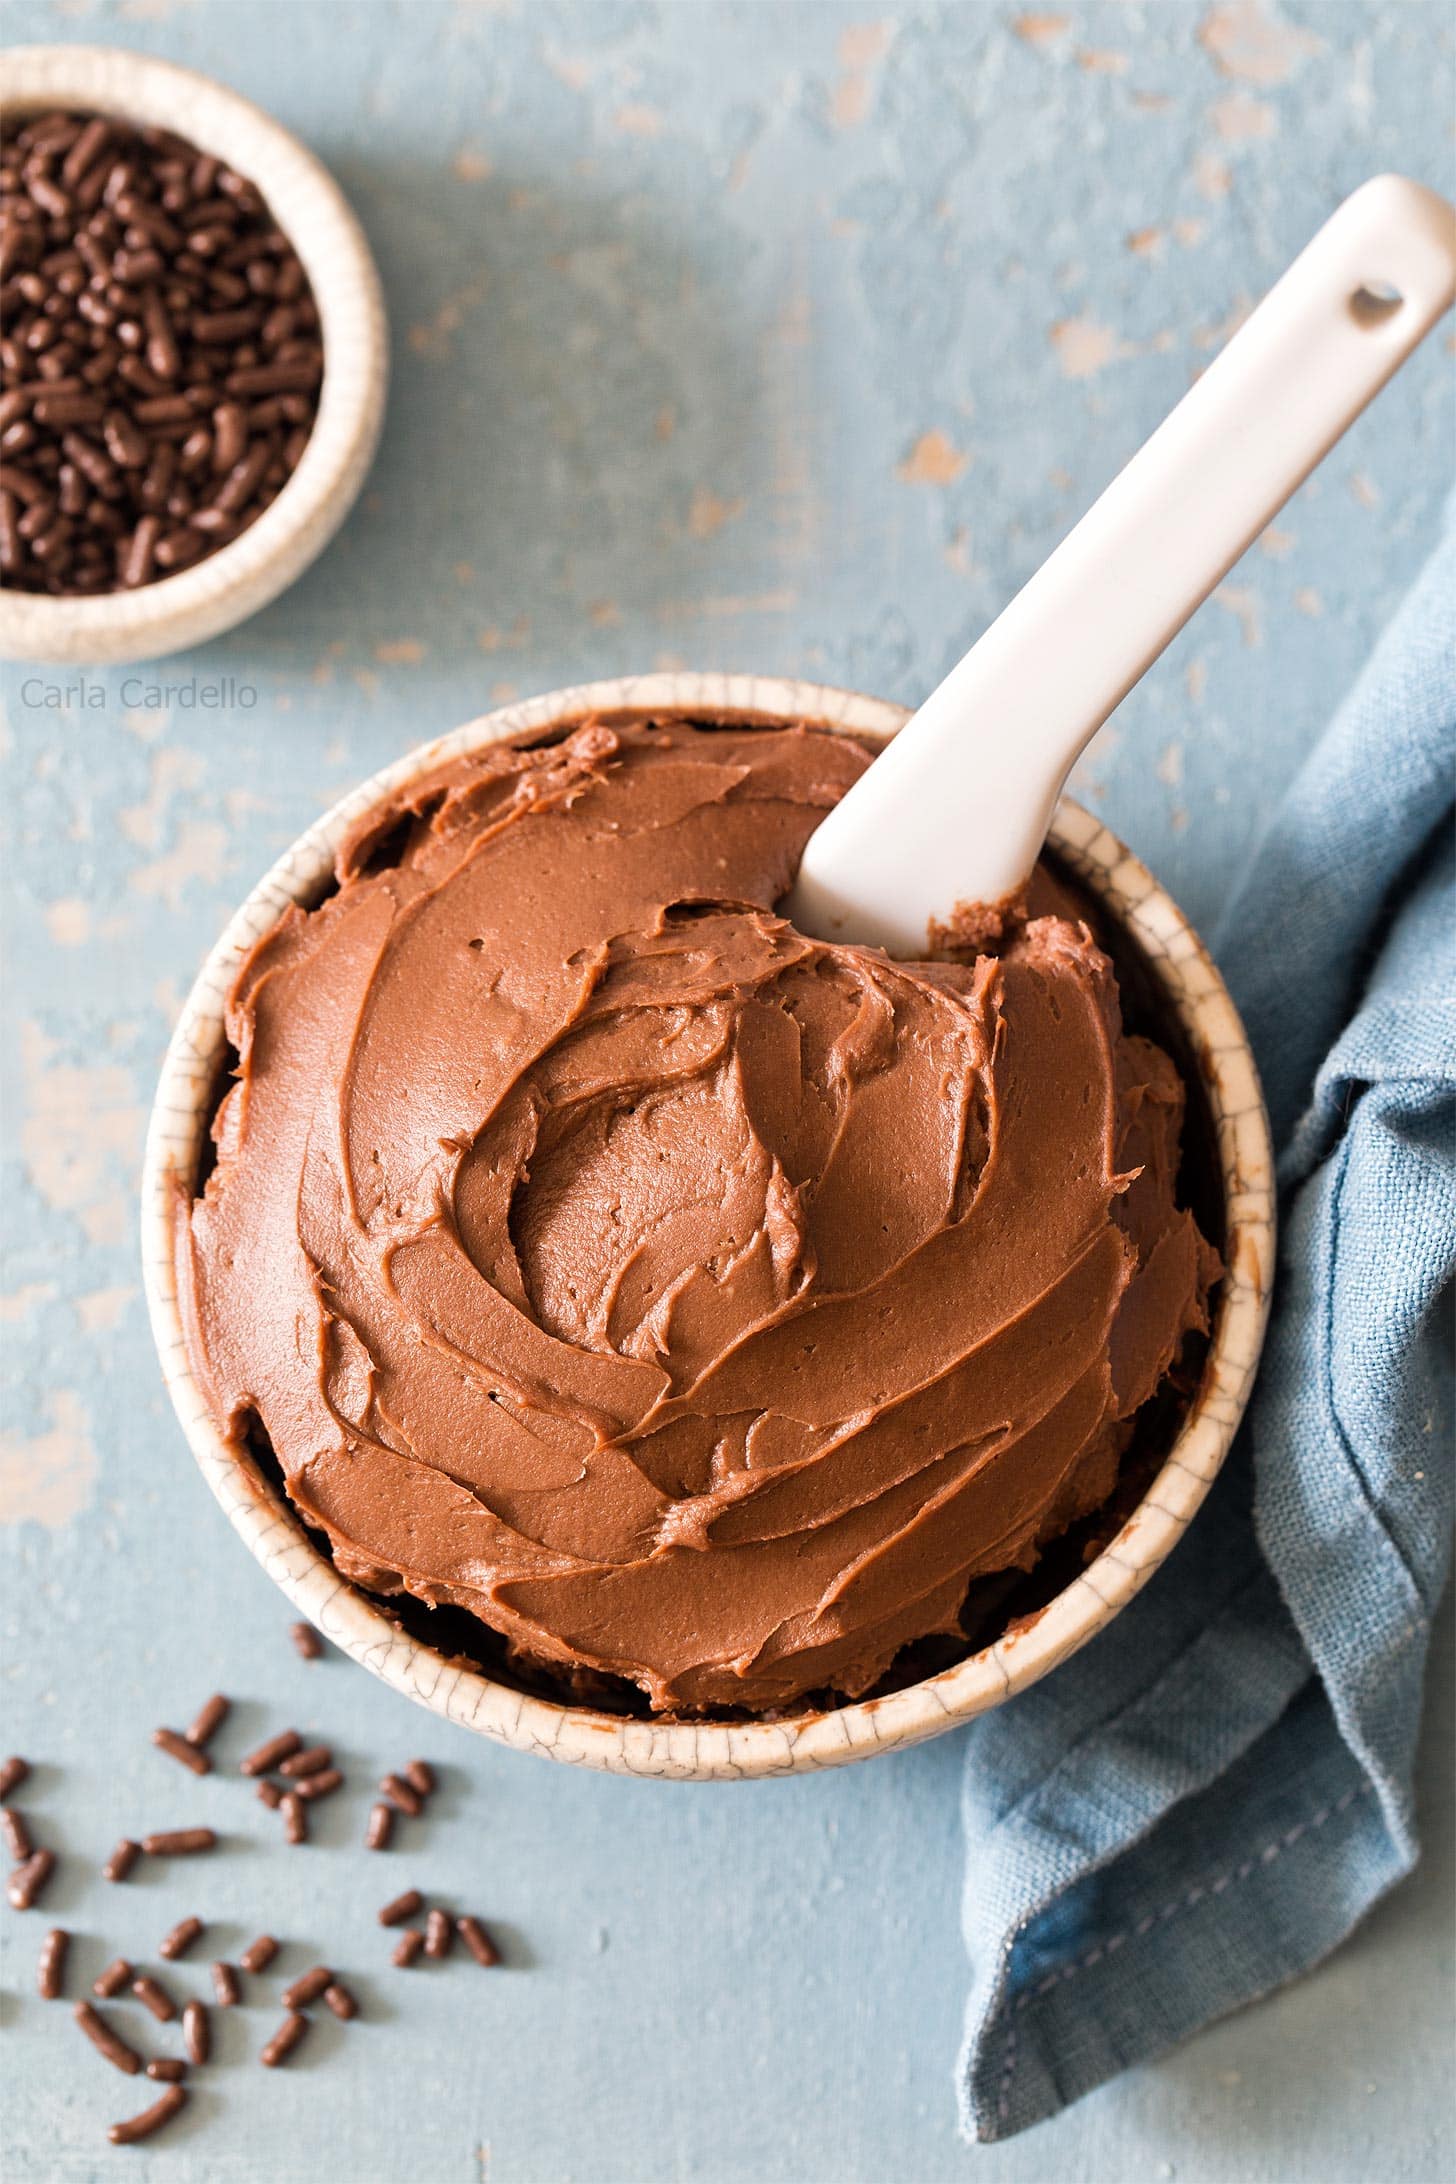 Cream Cheese Chocolate Frosting in small bowl with white knife